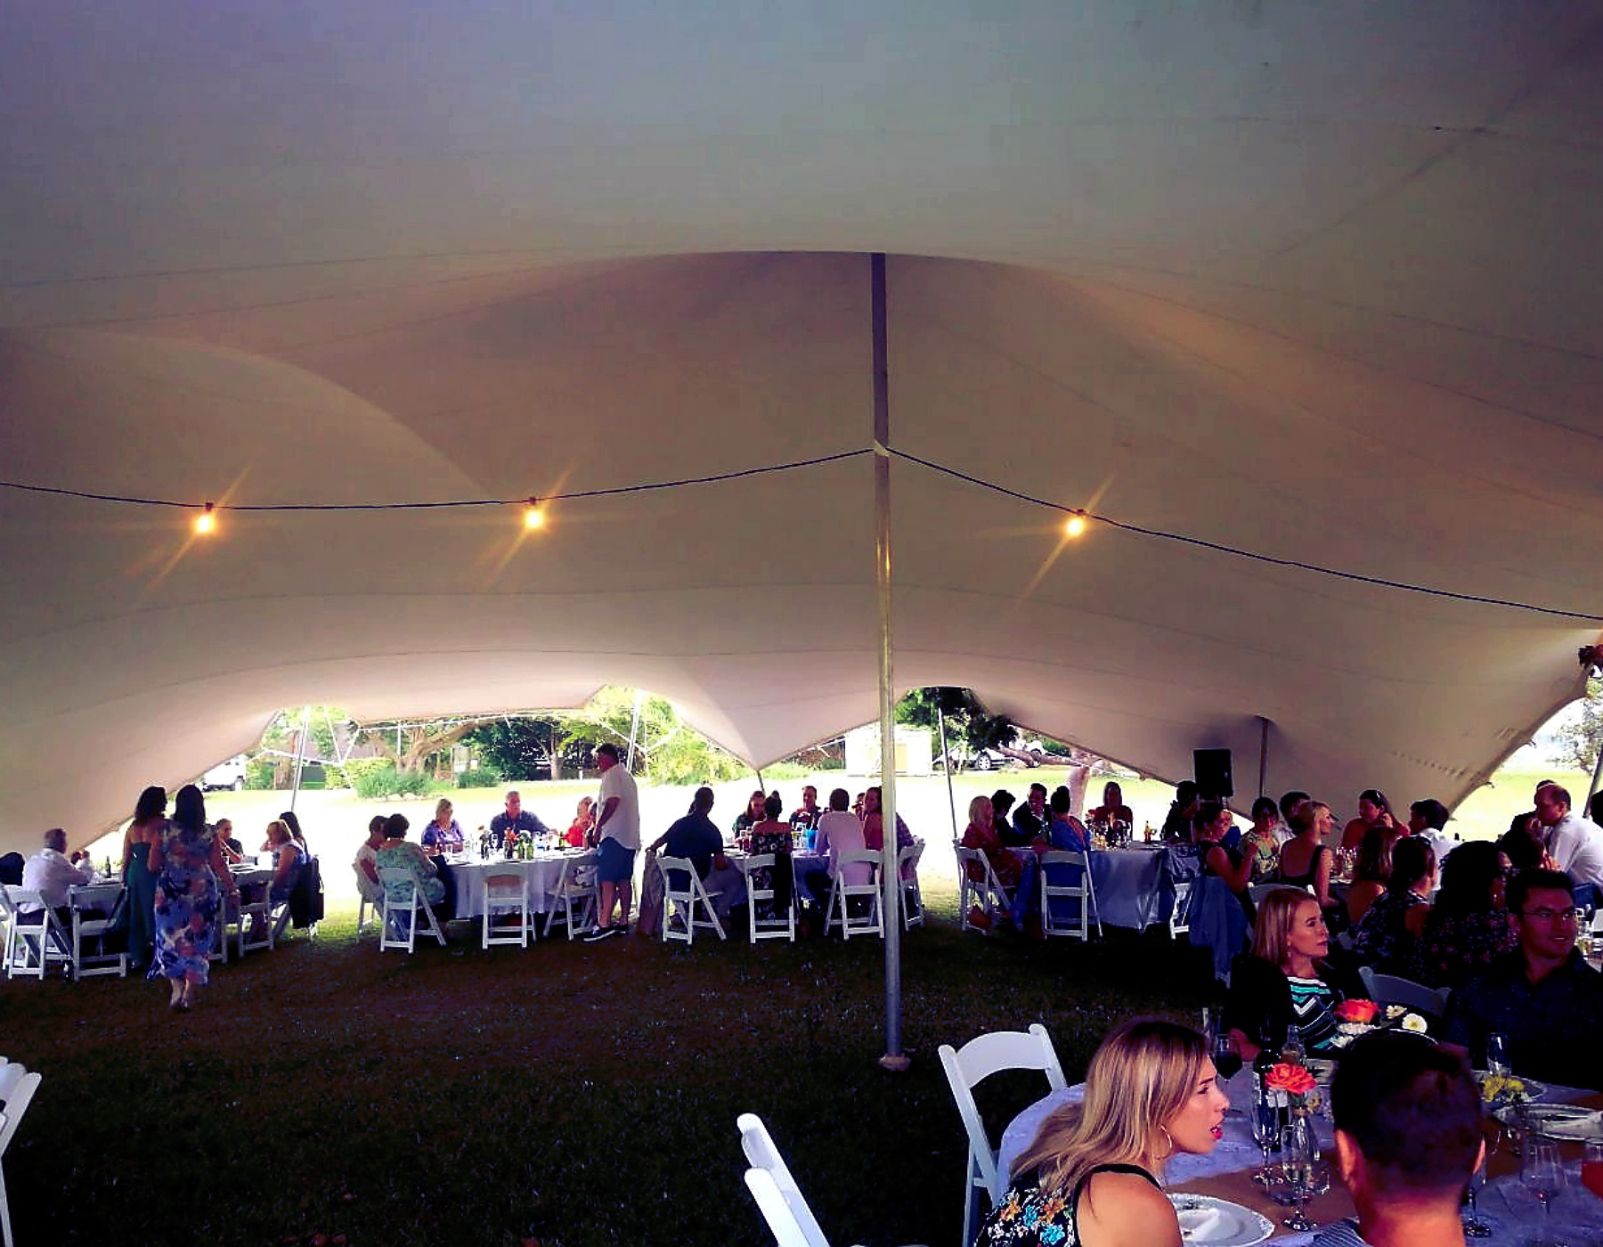 Wedding Reception In A White Stretch Tent With Lights.